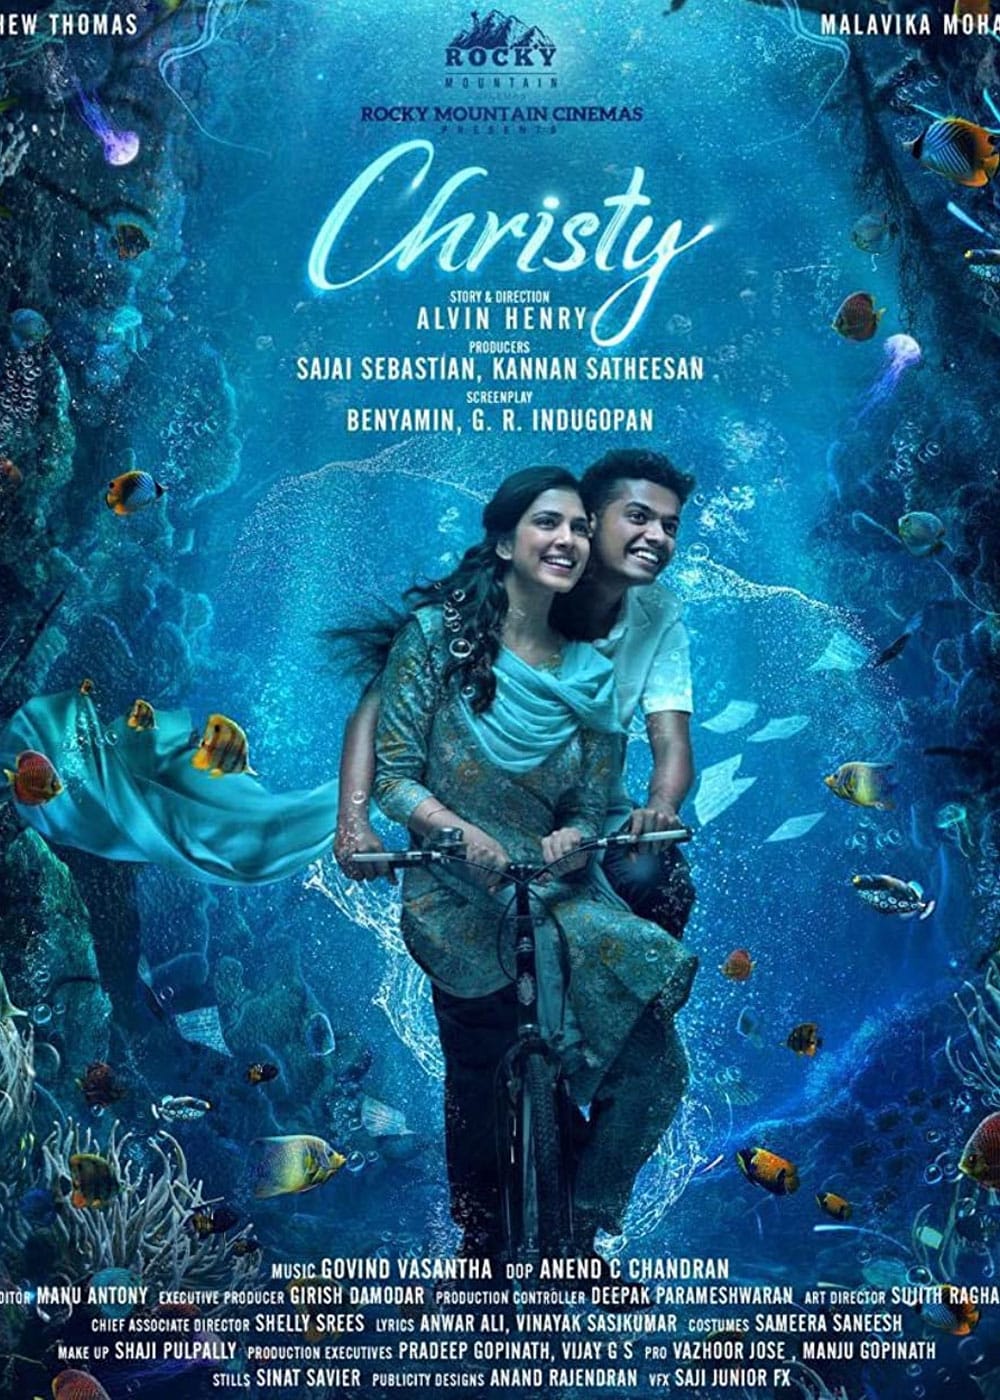 Christy Movie (2023) | Release Date, Review, Cast, Trailer - Gadgets 360